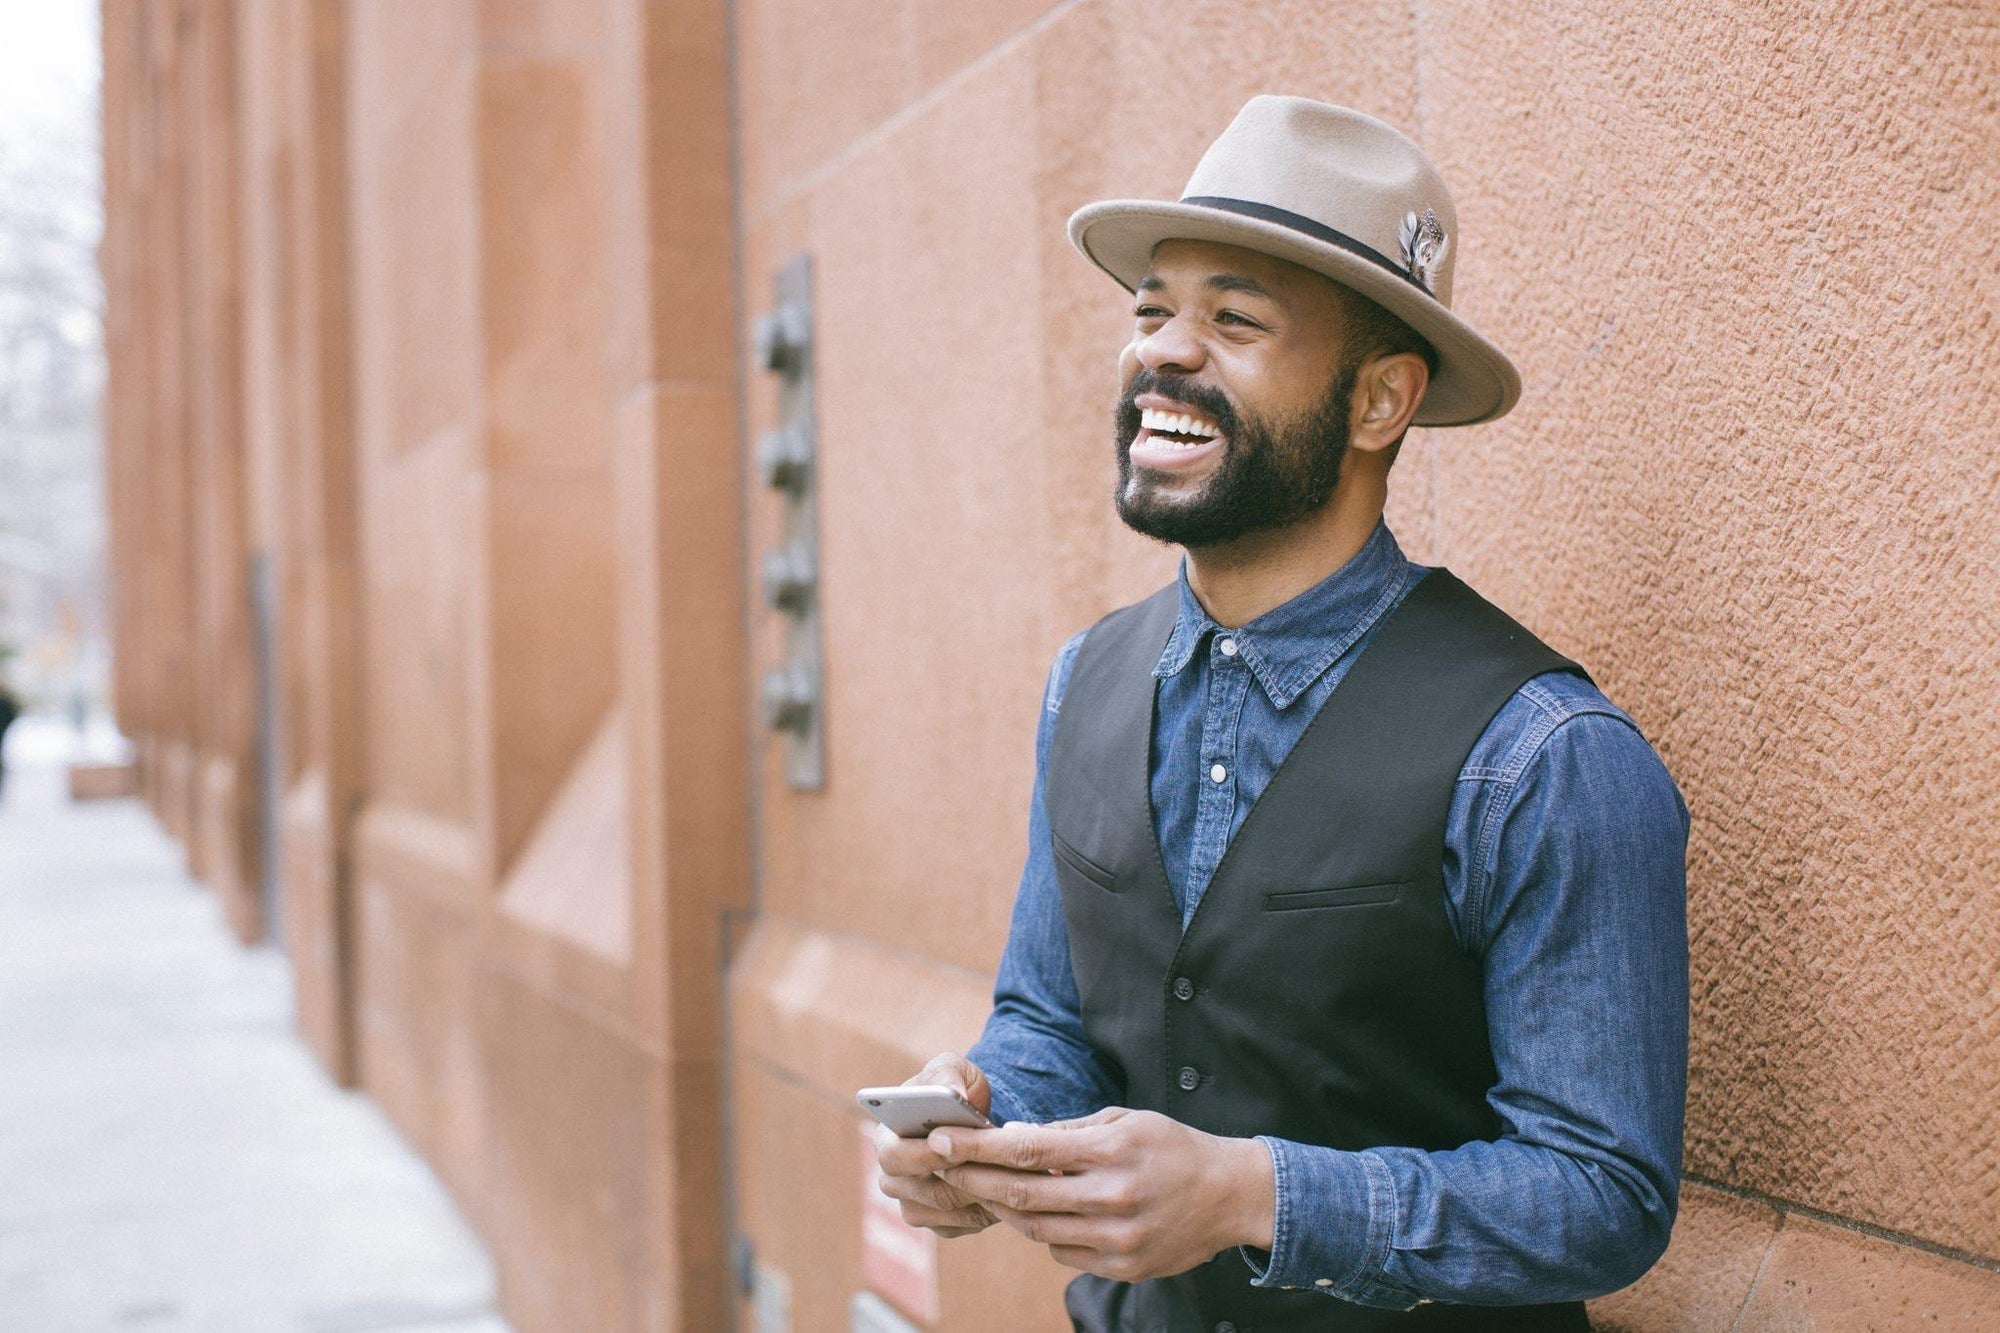 How To Wear A Hat: The Ultimate Guide For Men